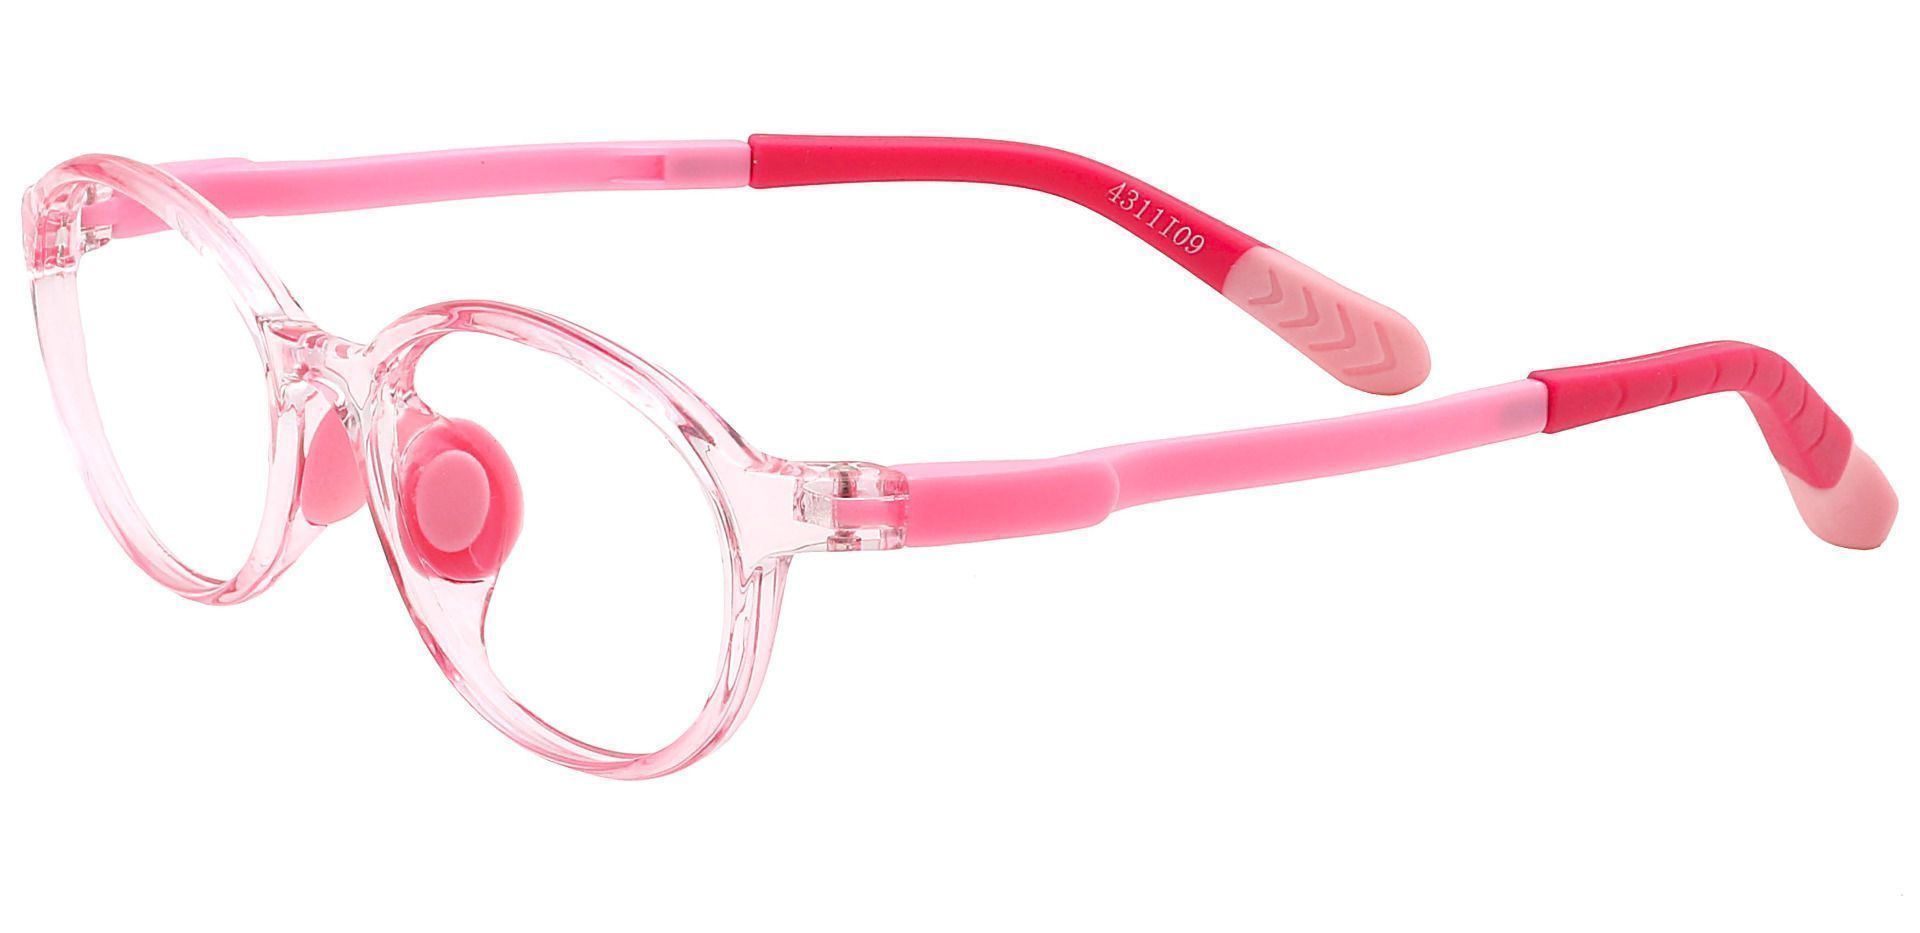 Axel Oval Non-Rx Glasses - Bubble Gum Pink Crystal